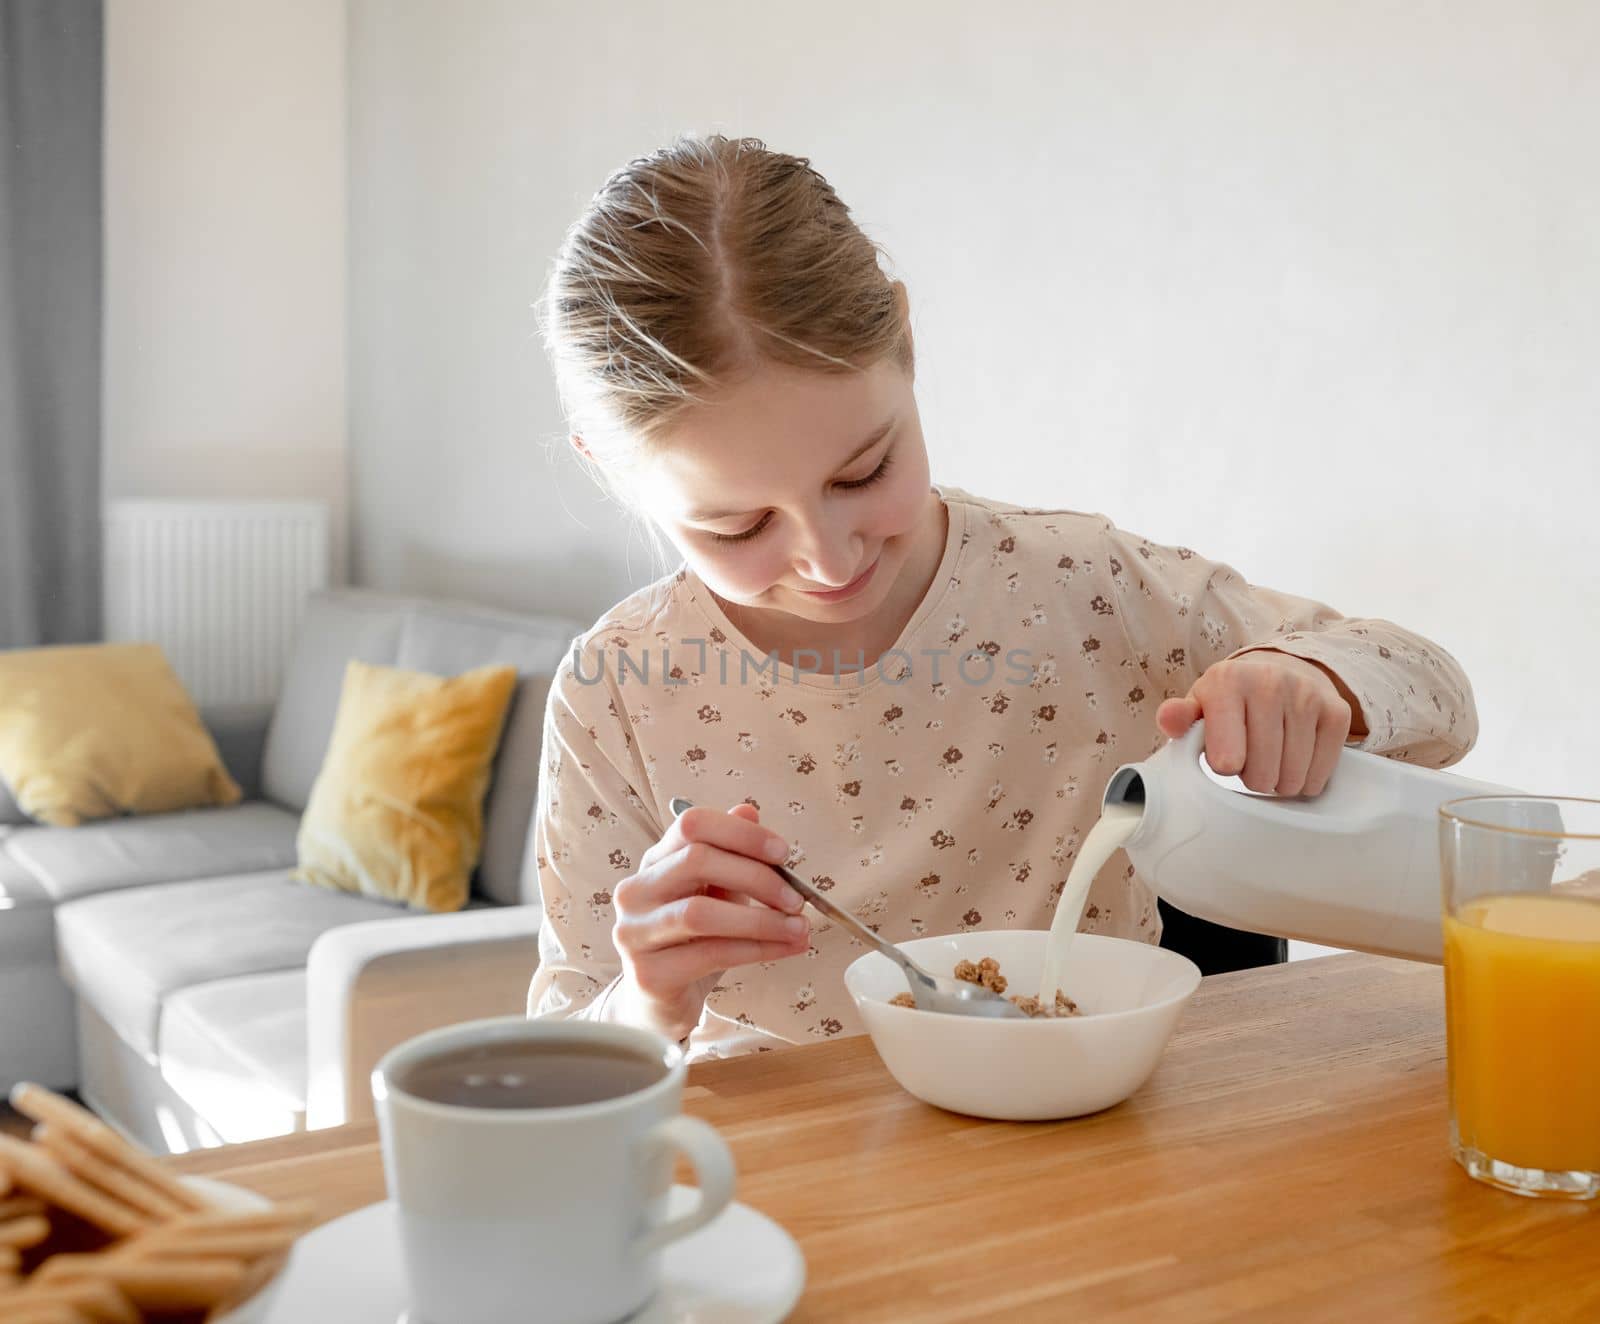 Cute girl child put cereal oat meal for breakfast by tan4ikk1